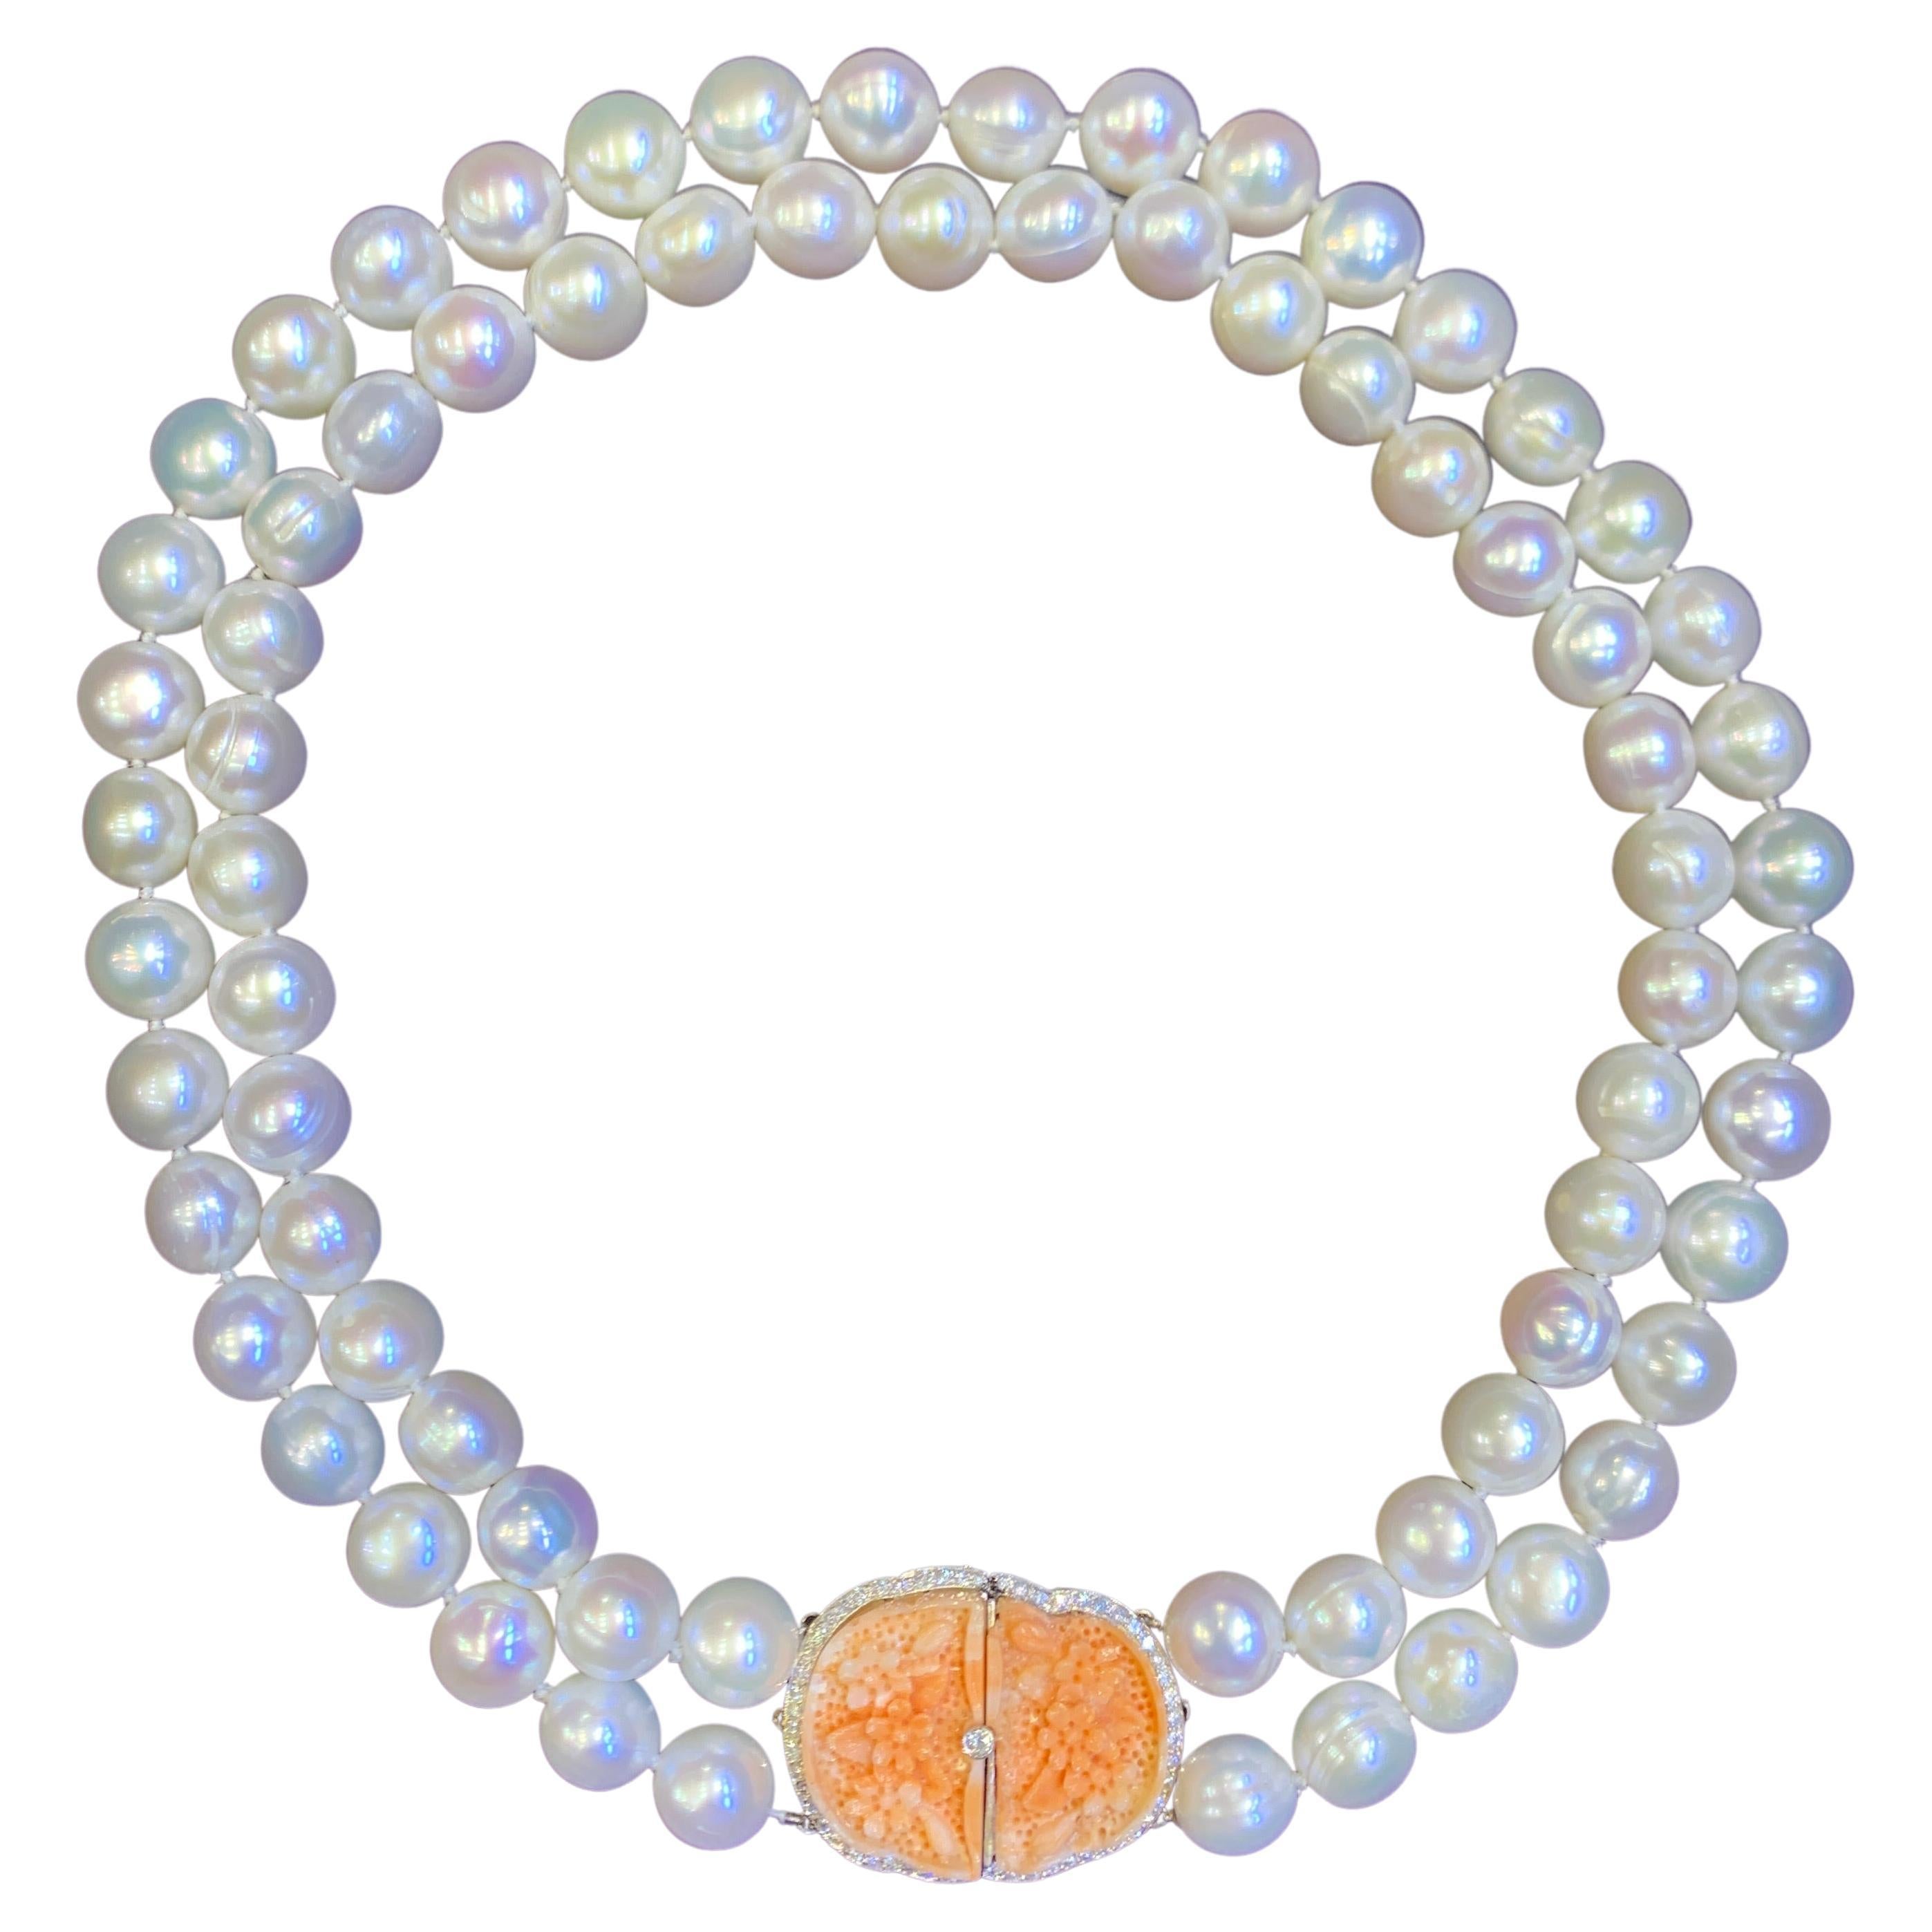 Two Strand Pearl & Carved Coral Necklace

This necklace consists of 2 strands of cultured pearls attached by an 18 karat white gold clasp set with 56 round cut diamonds and 2 beautifully carved floral motif corals

Stamped 750

Length: 18